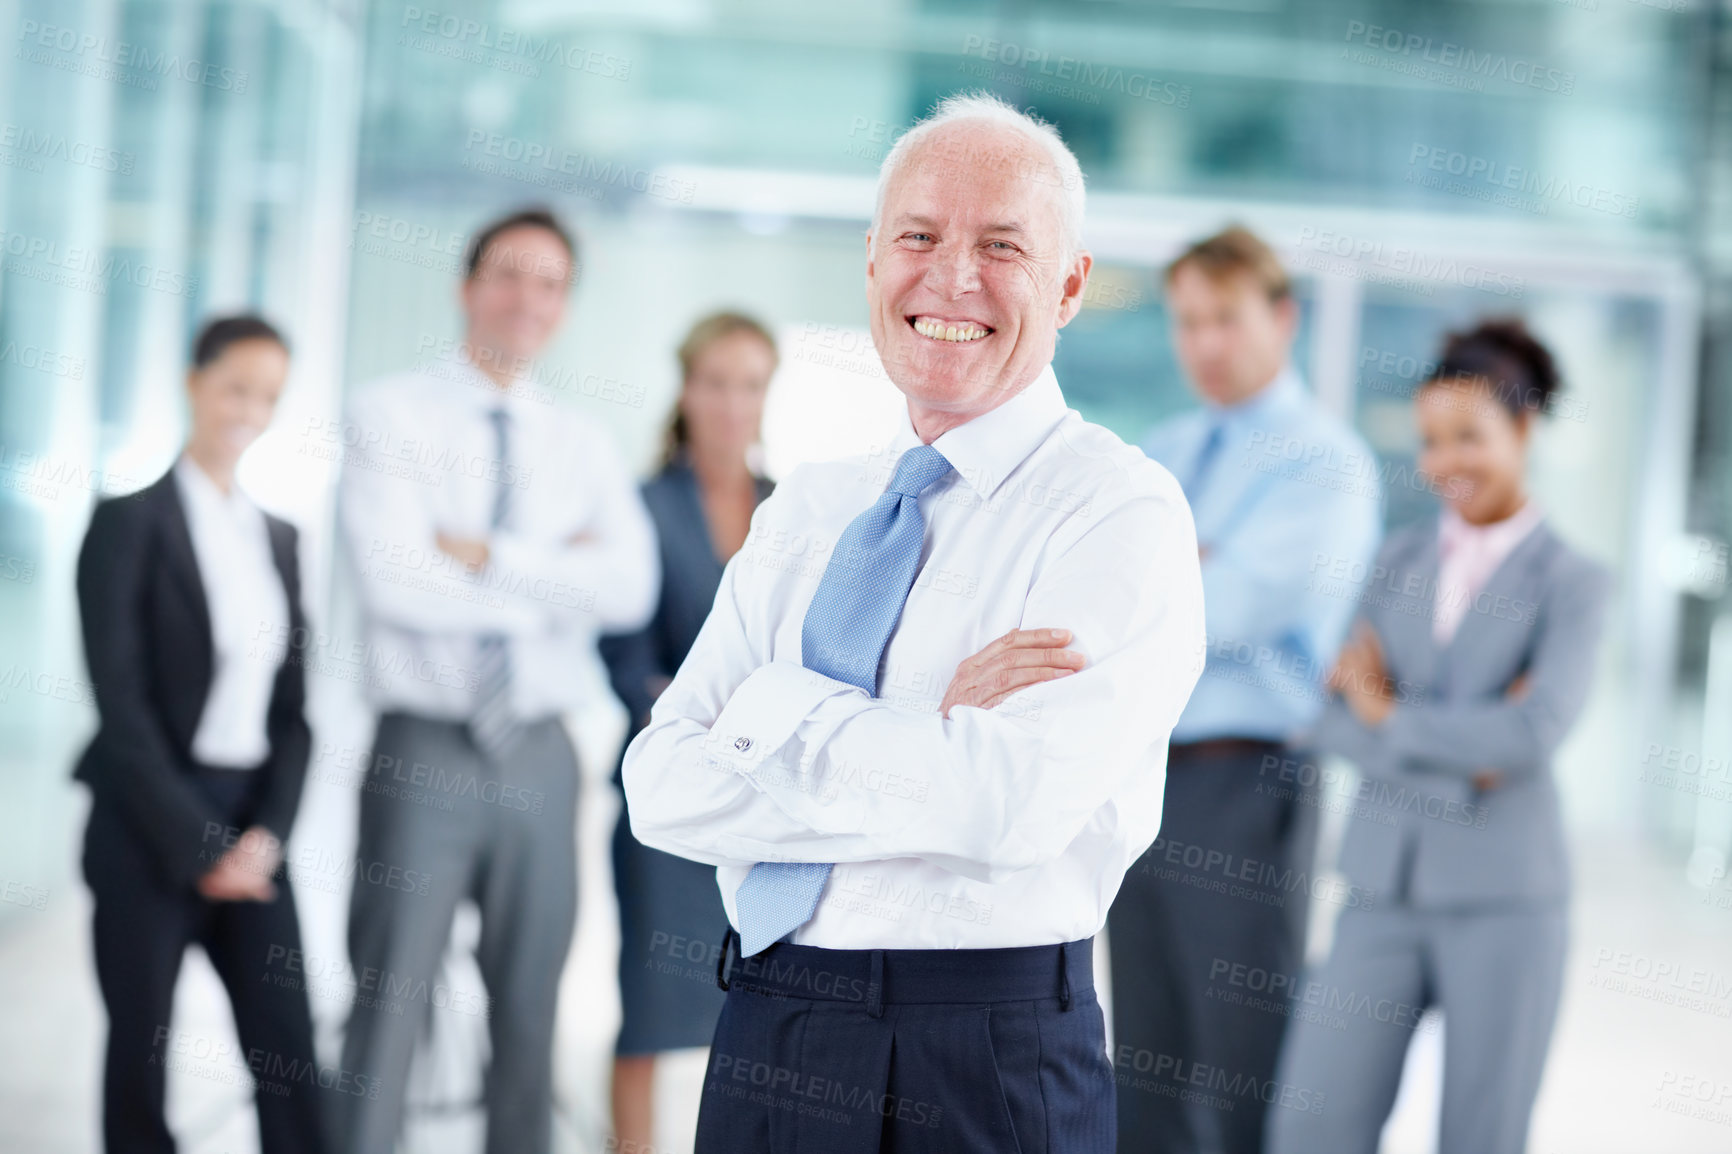 Buy stock photo Happy senior businessman standing with his team in the background - portrait 